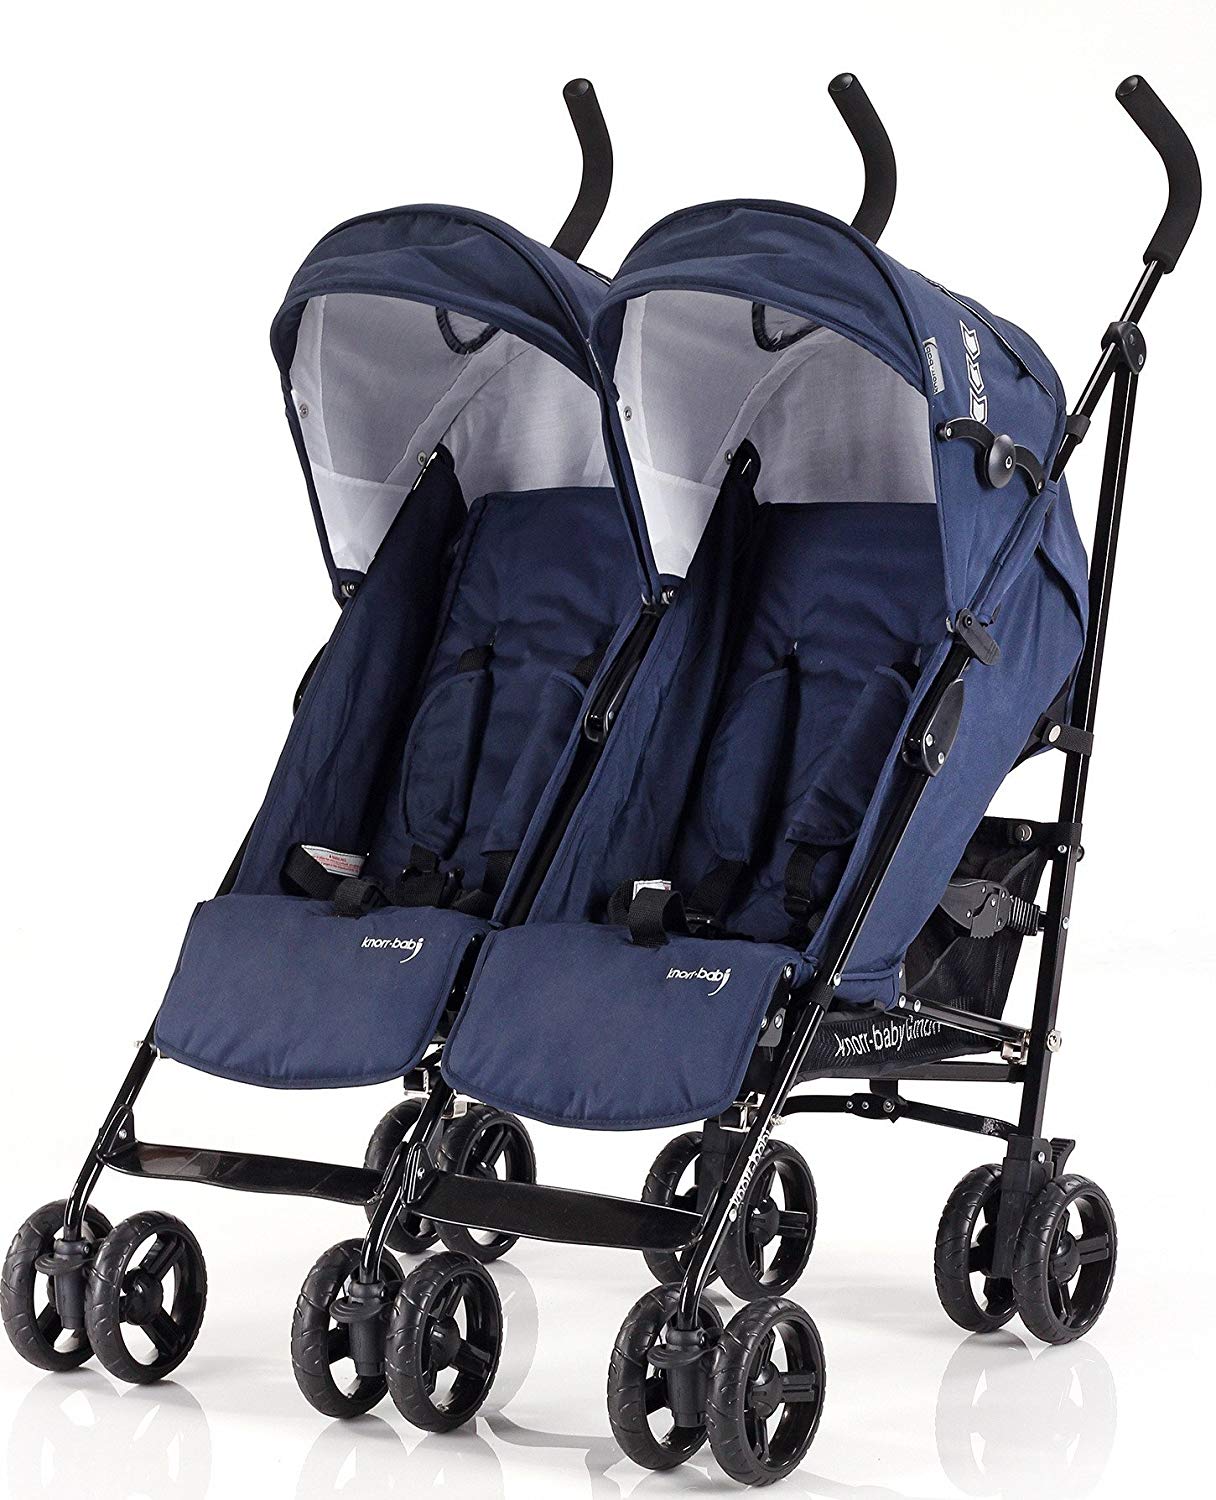 knorr-baby Side by Side 832200 Double Pushchair Blue